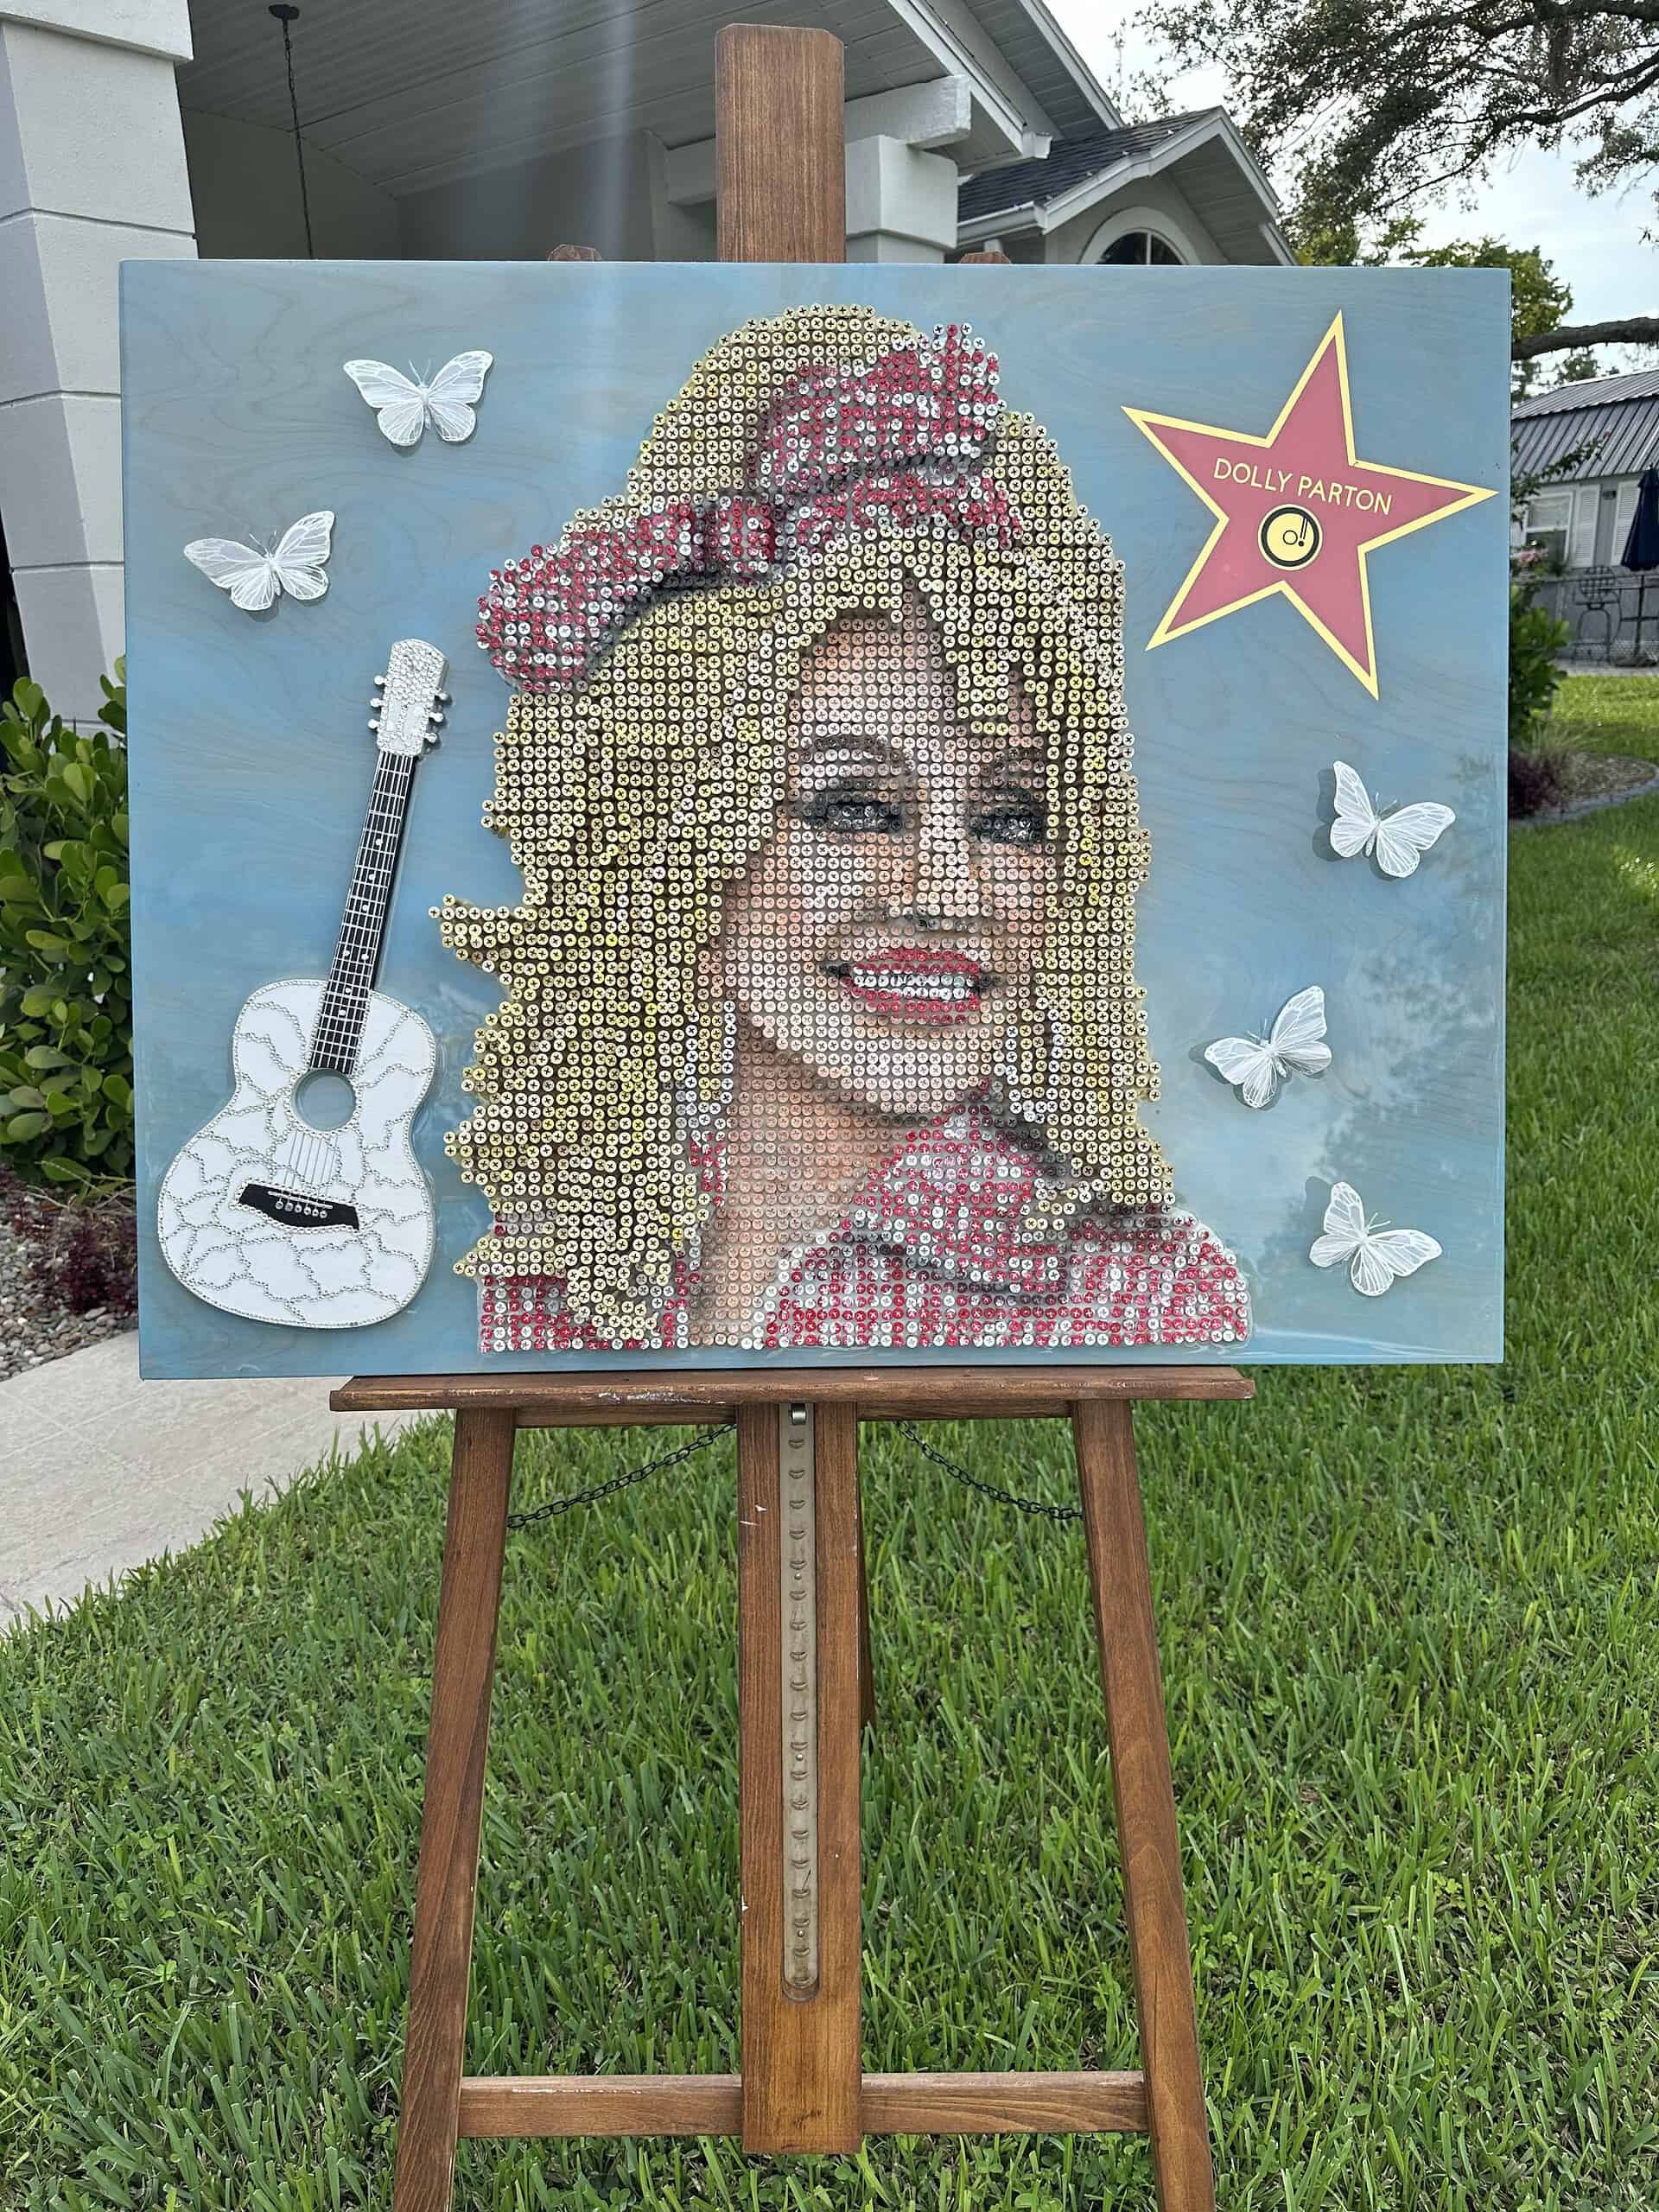 Dolly Parton screw-art piece. Made from over 3,000 screws, 3D butterflies, a miniature replica of her favorite guitar adorned with Swarovski crystals, a Hollywood star, on a wooden blue stained resin coated background! It measures 40” wide x 32” tall. 